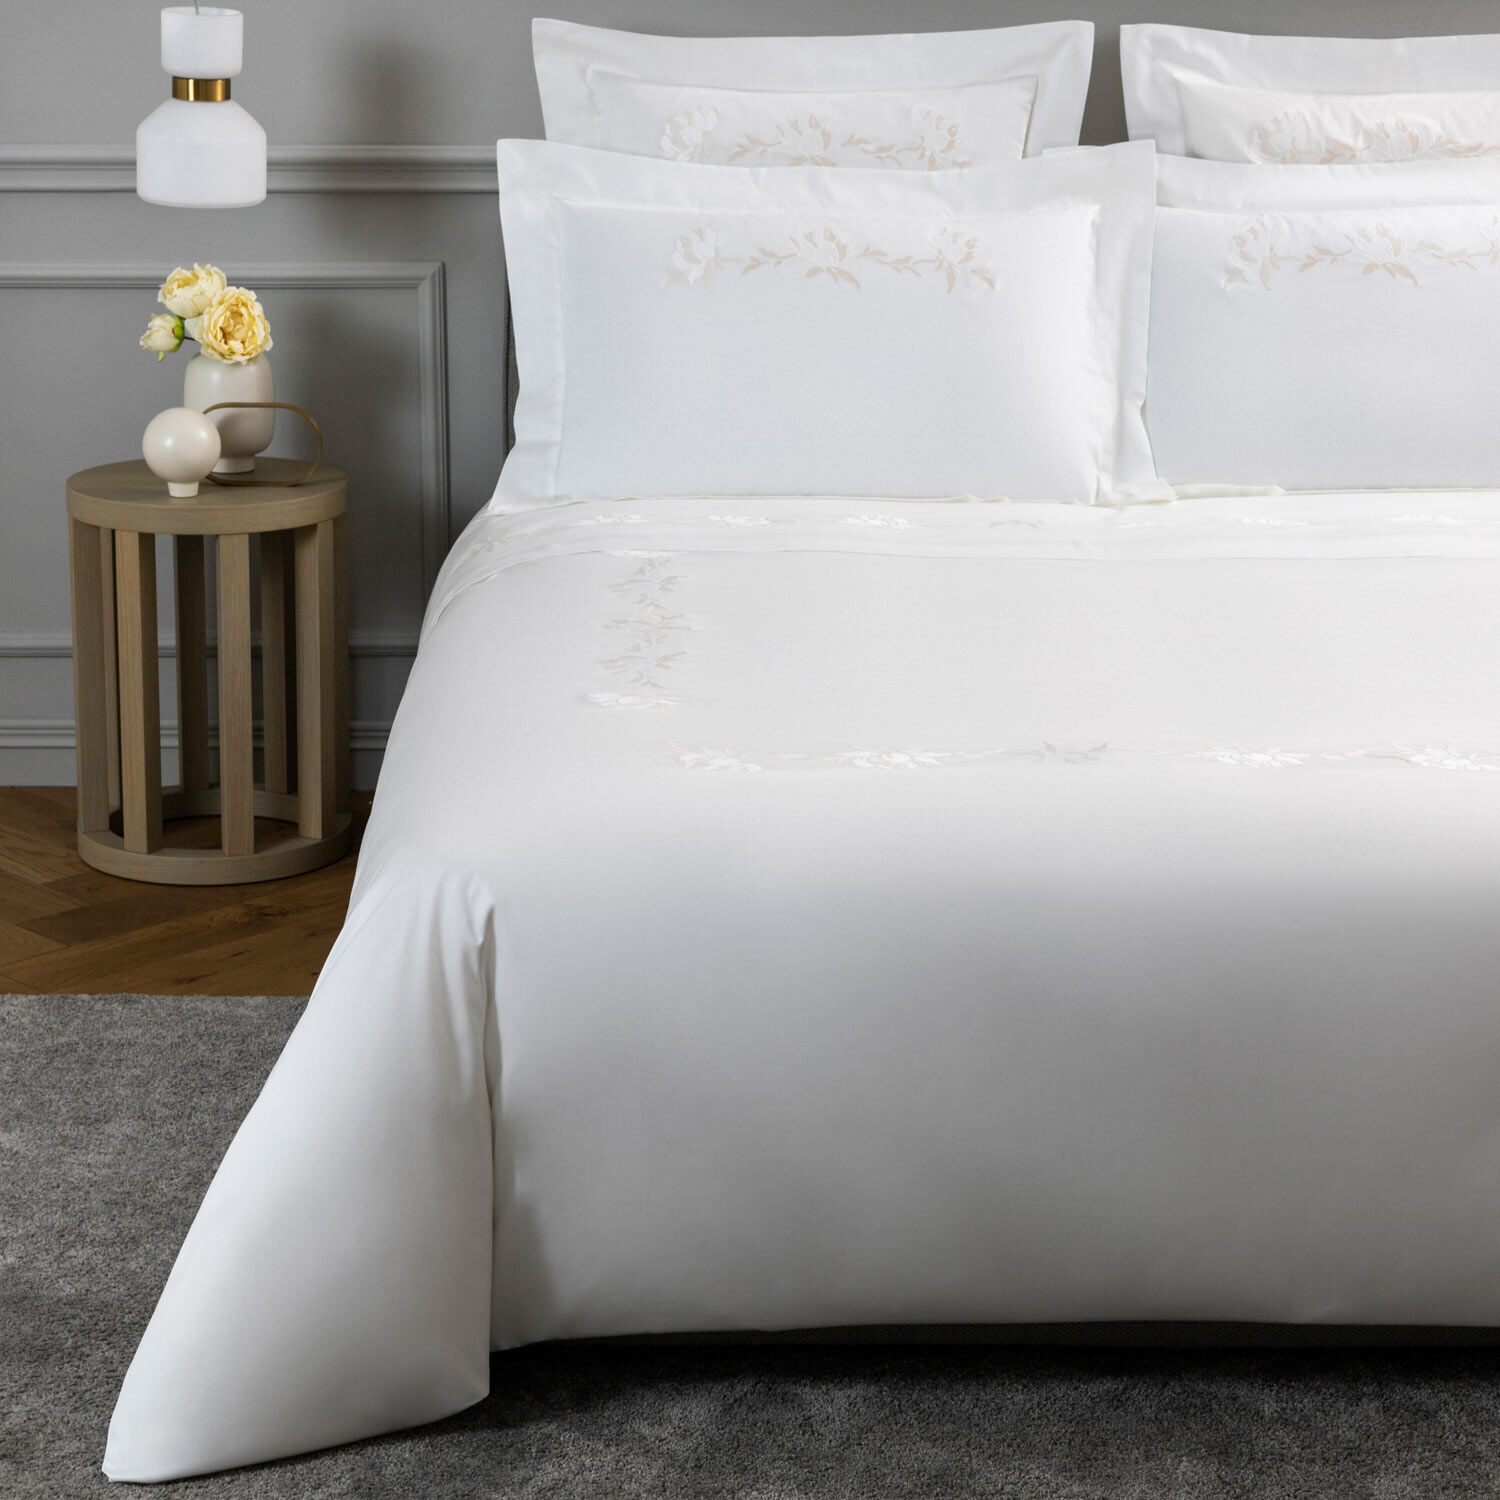 slide 1 Peonia Embroidered Duvet Cover